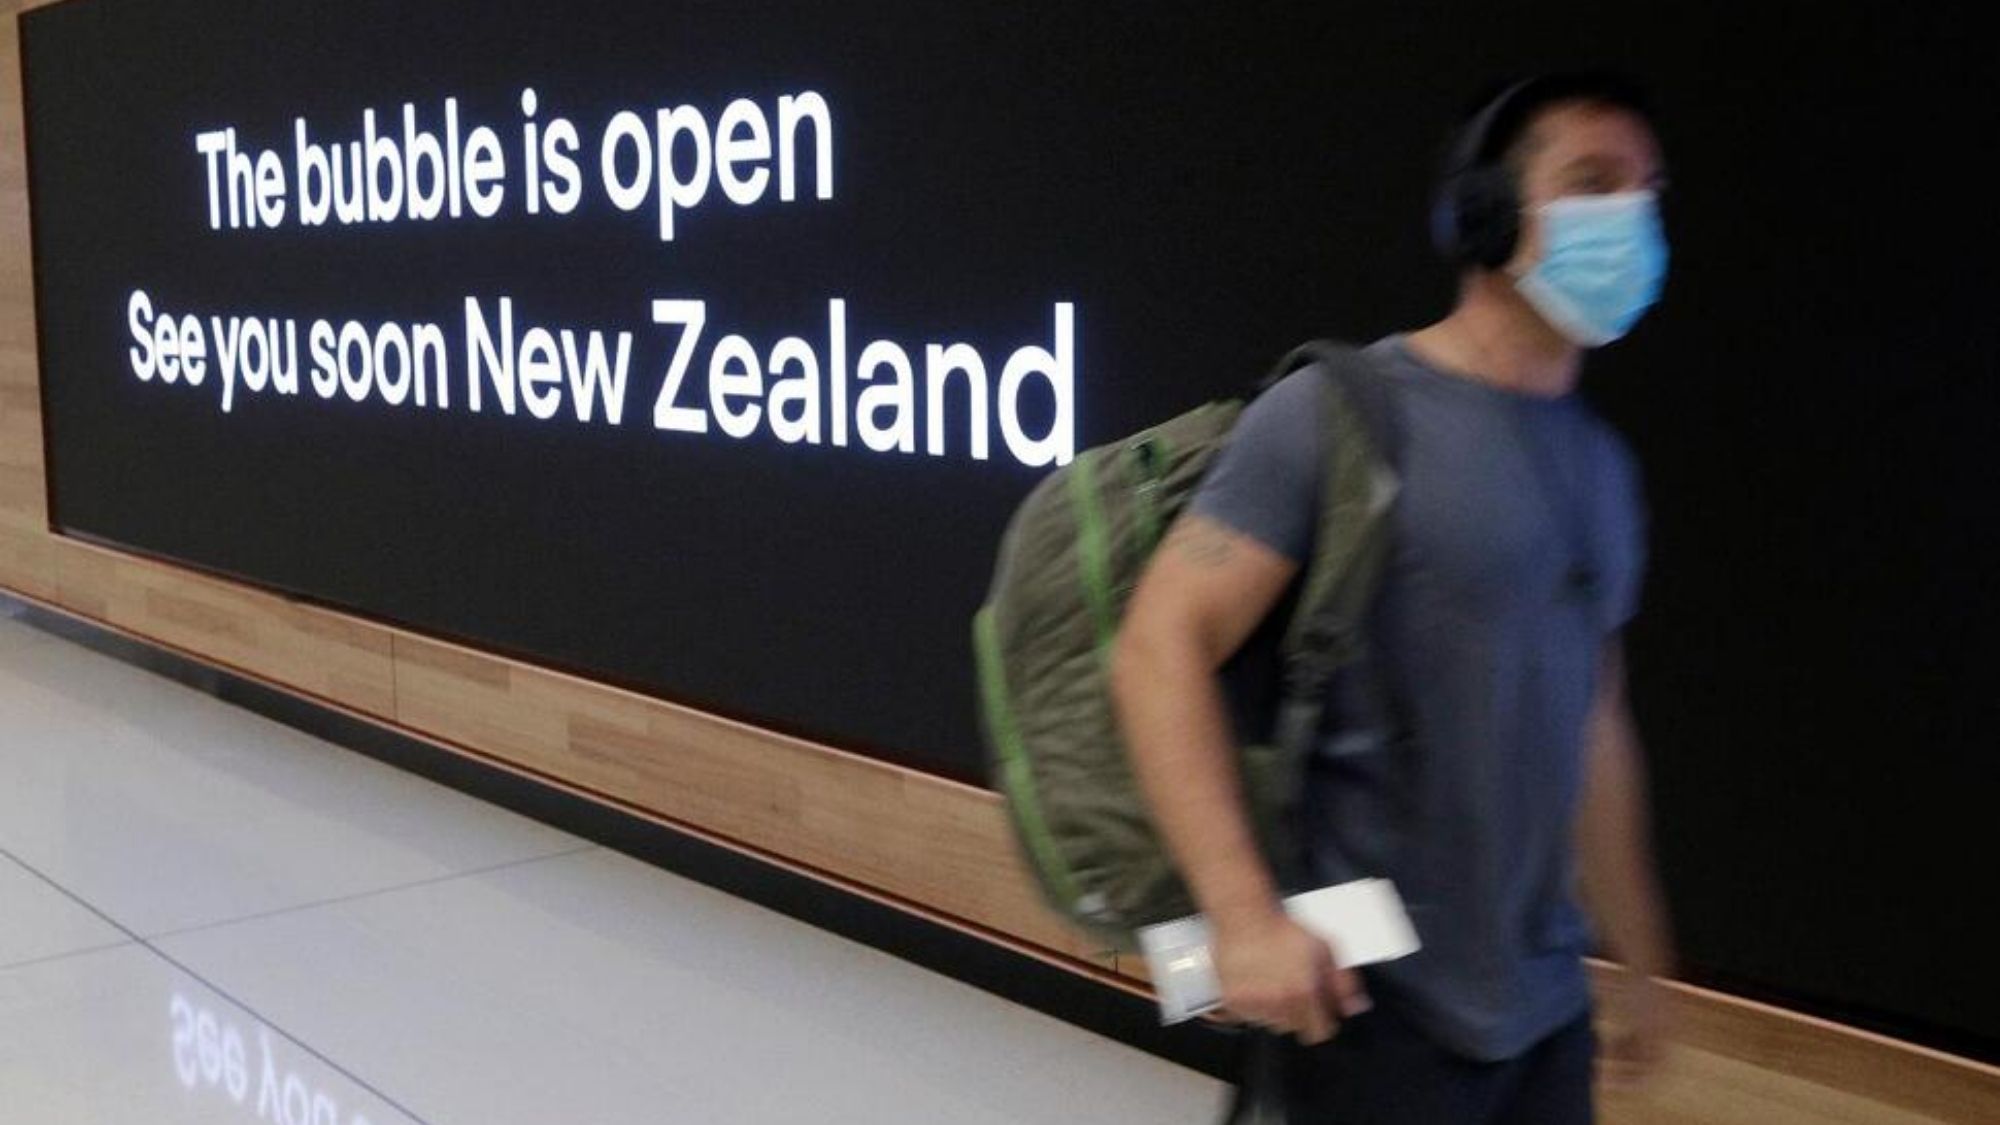 NZ won’t reopen to foreigners for another 5 months photo USNews.com